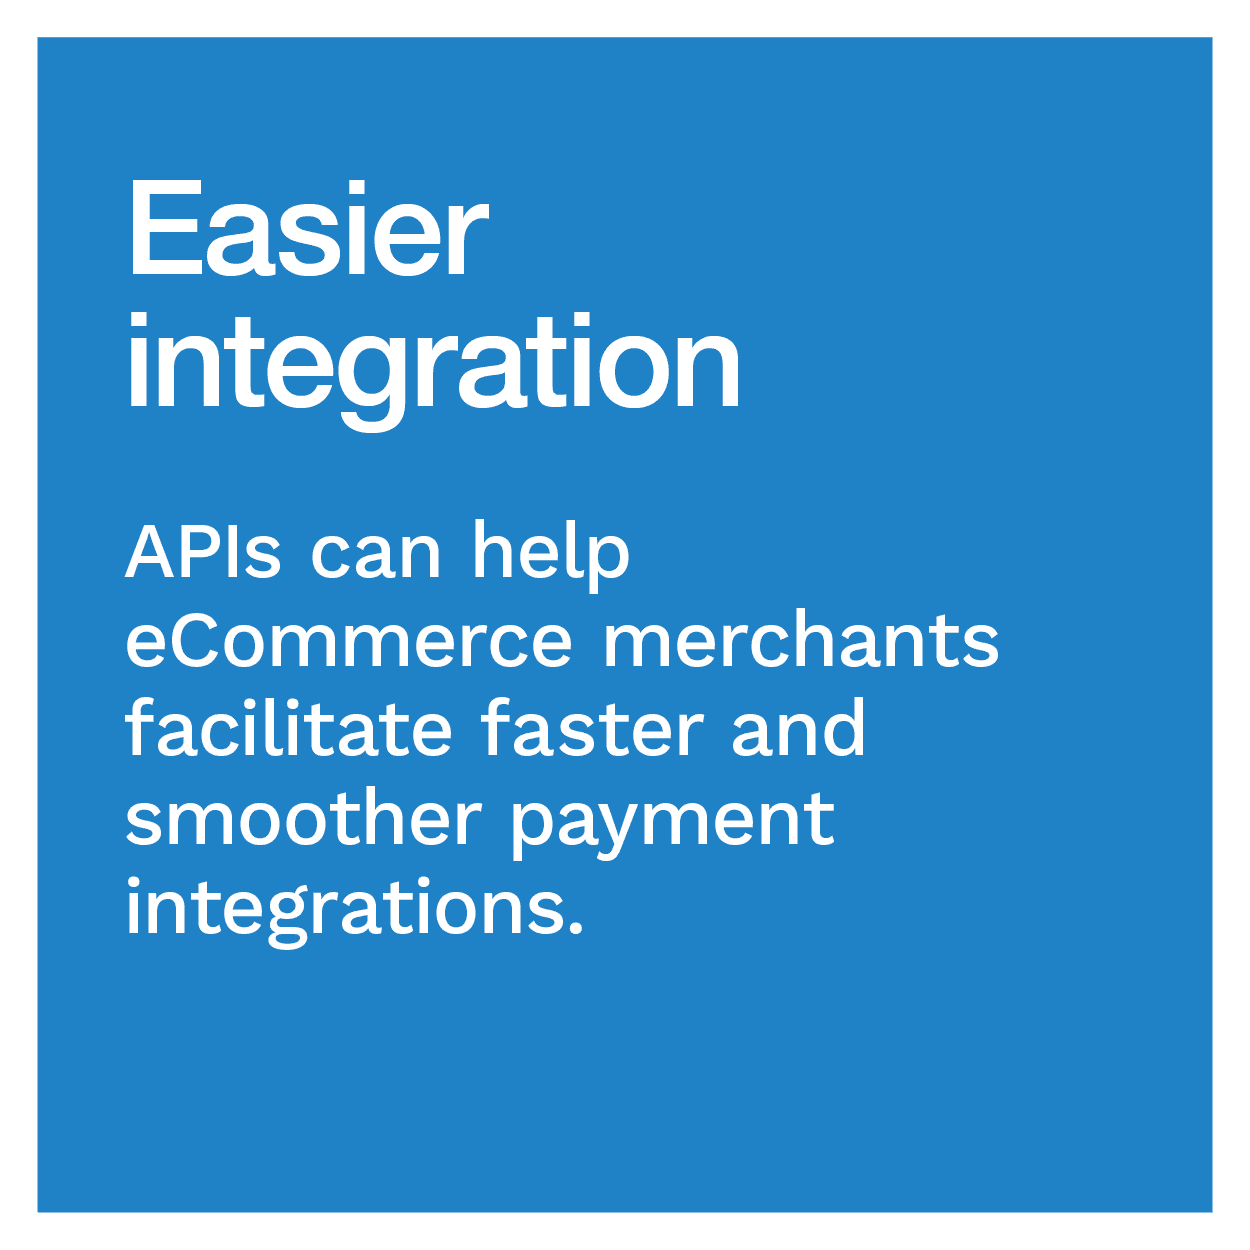 Easier integration: APIs can help eCommerce merchants facilitate faster and smoother payment integrations.